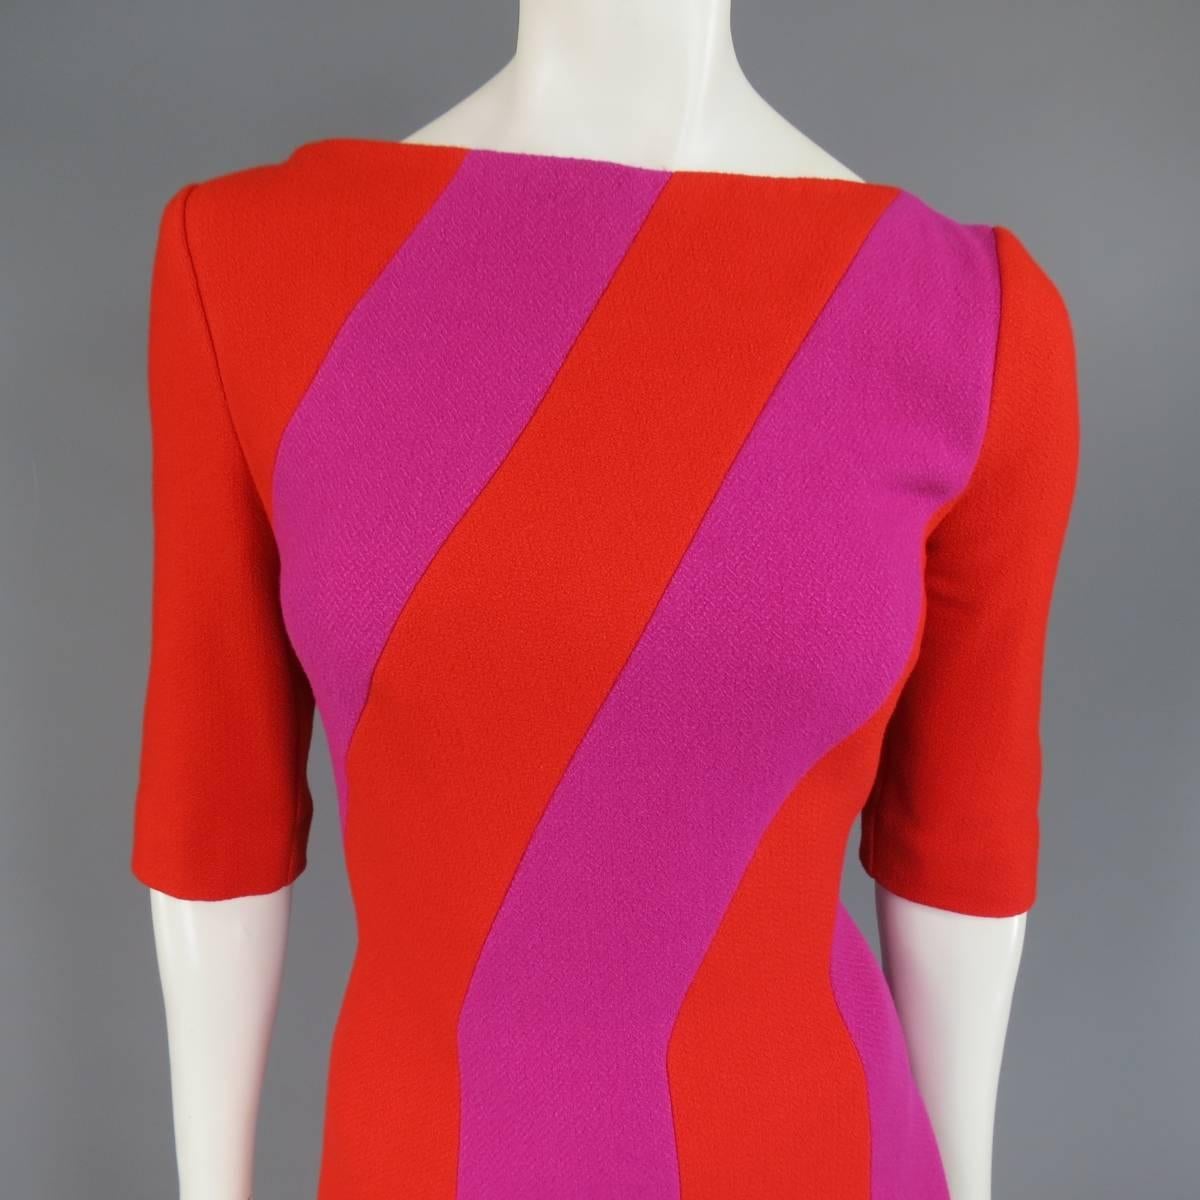 This fabulous TALBOT RUNOF winter dress comes in a vibrant red and magenta color block striped virgin wool blend fabric and features a scoop neck, three quarter sleeves, and a line skirt. Made in Germany.
 
Excellent Pre-Owned Ocndition.
Marked: